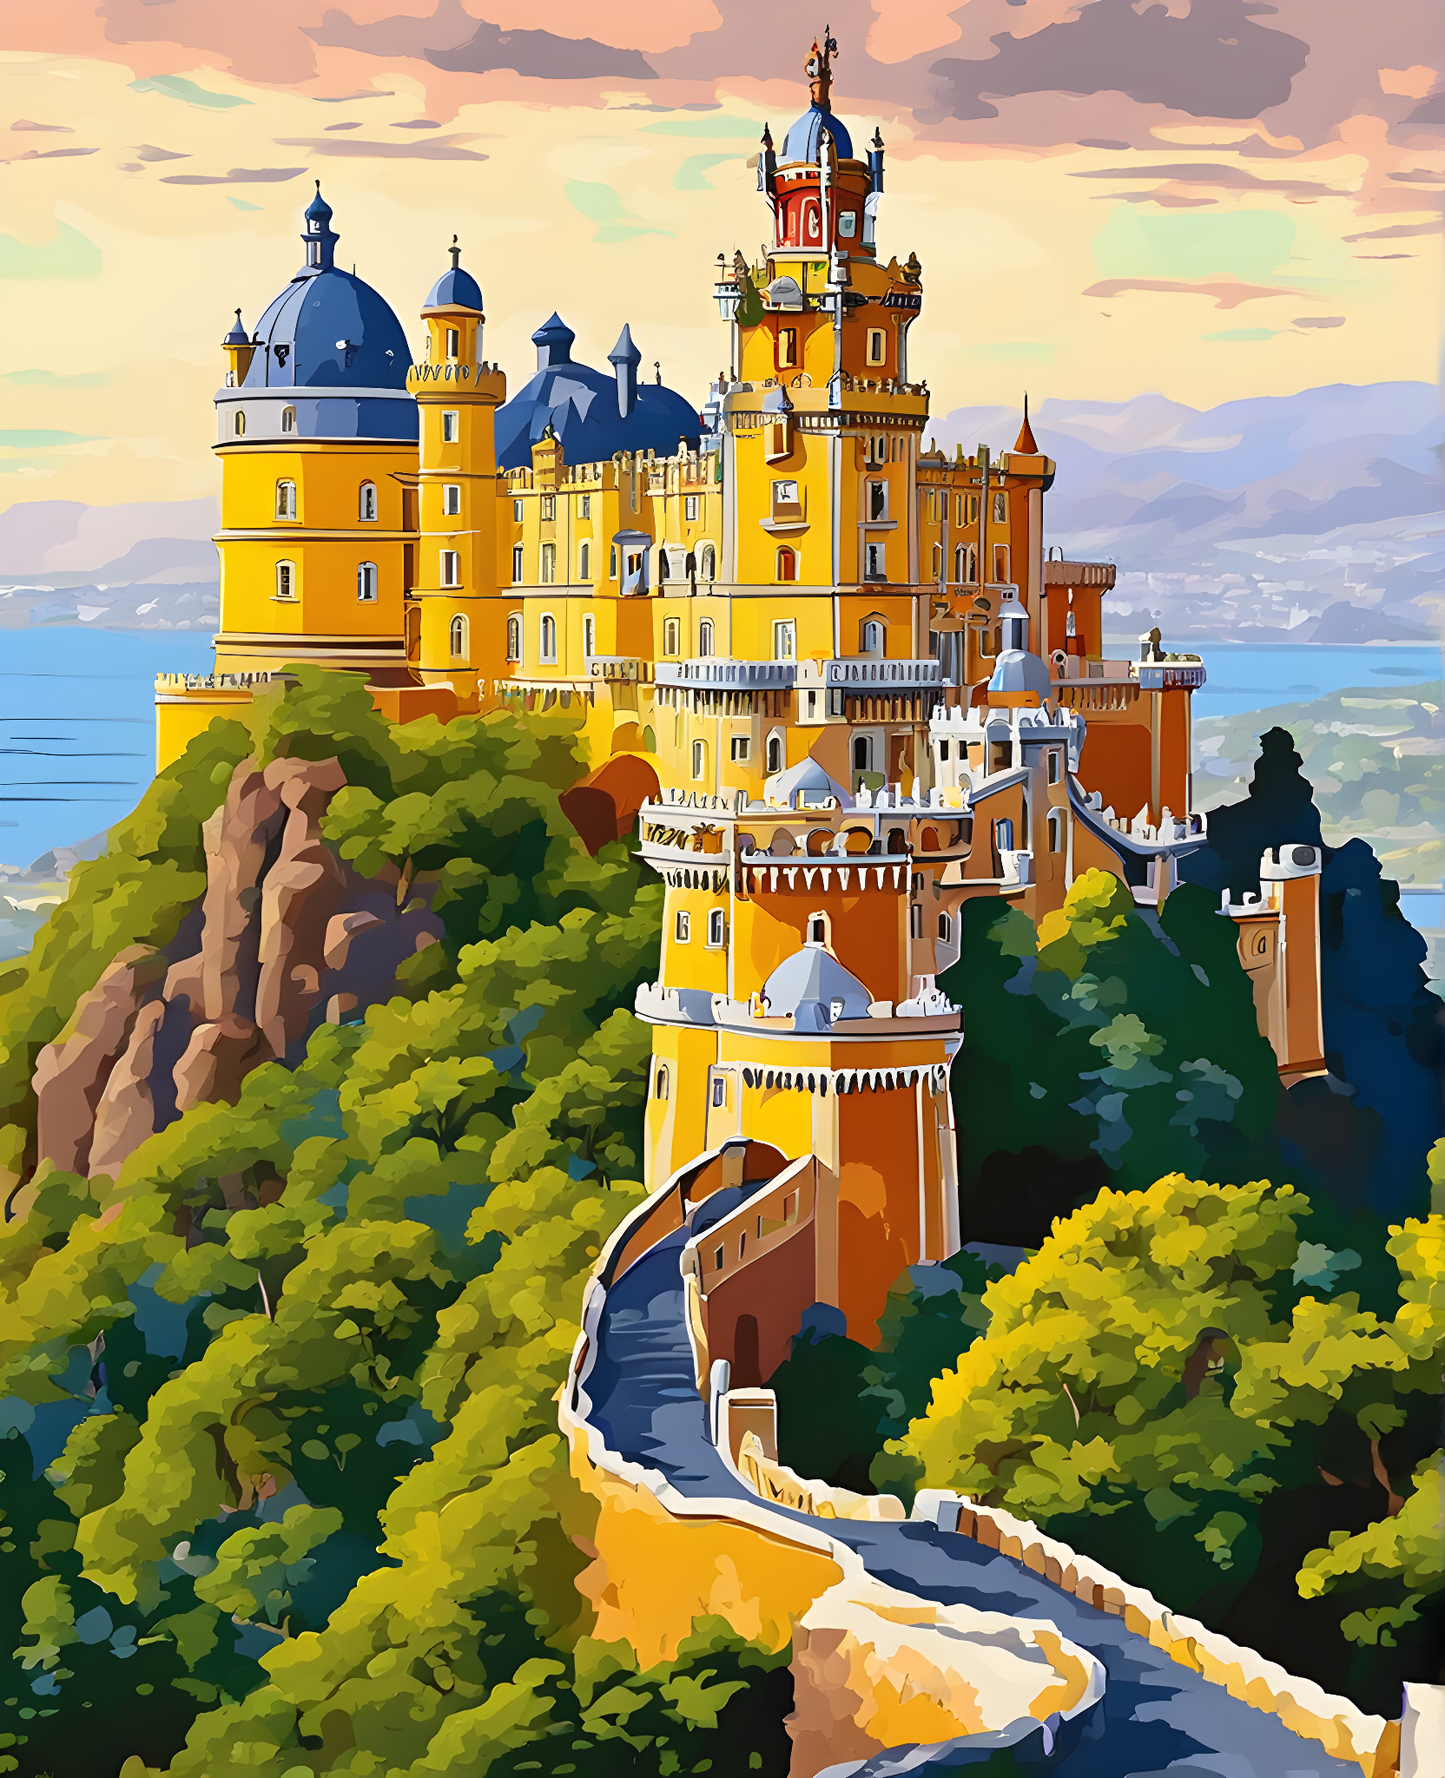 Castles OD - Pena Palace, Portugal (9) - Van-Go Paint-By-Number Kit